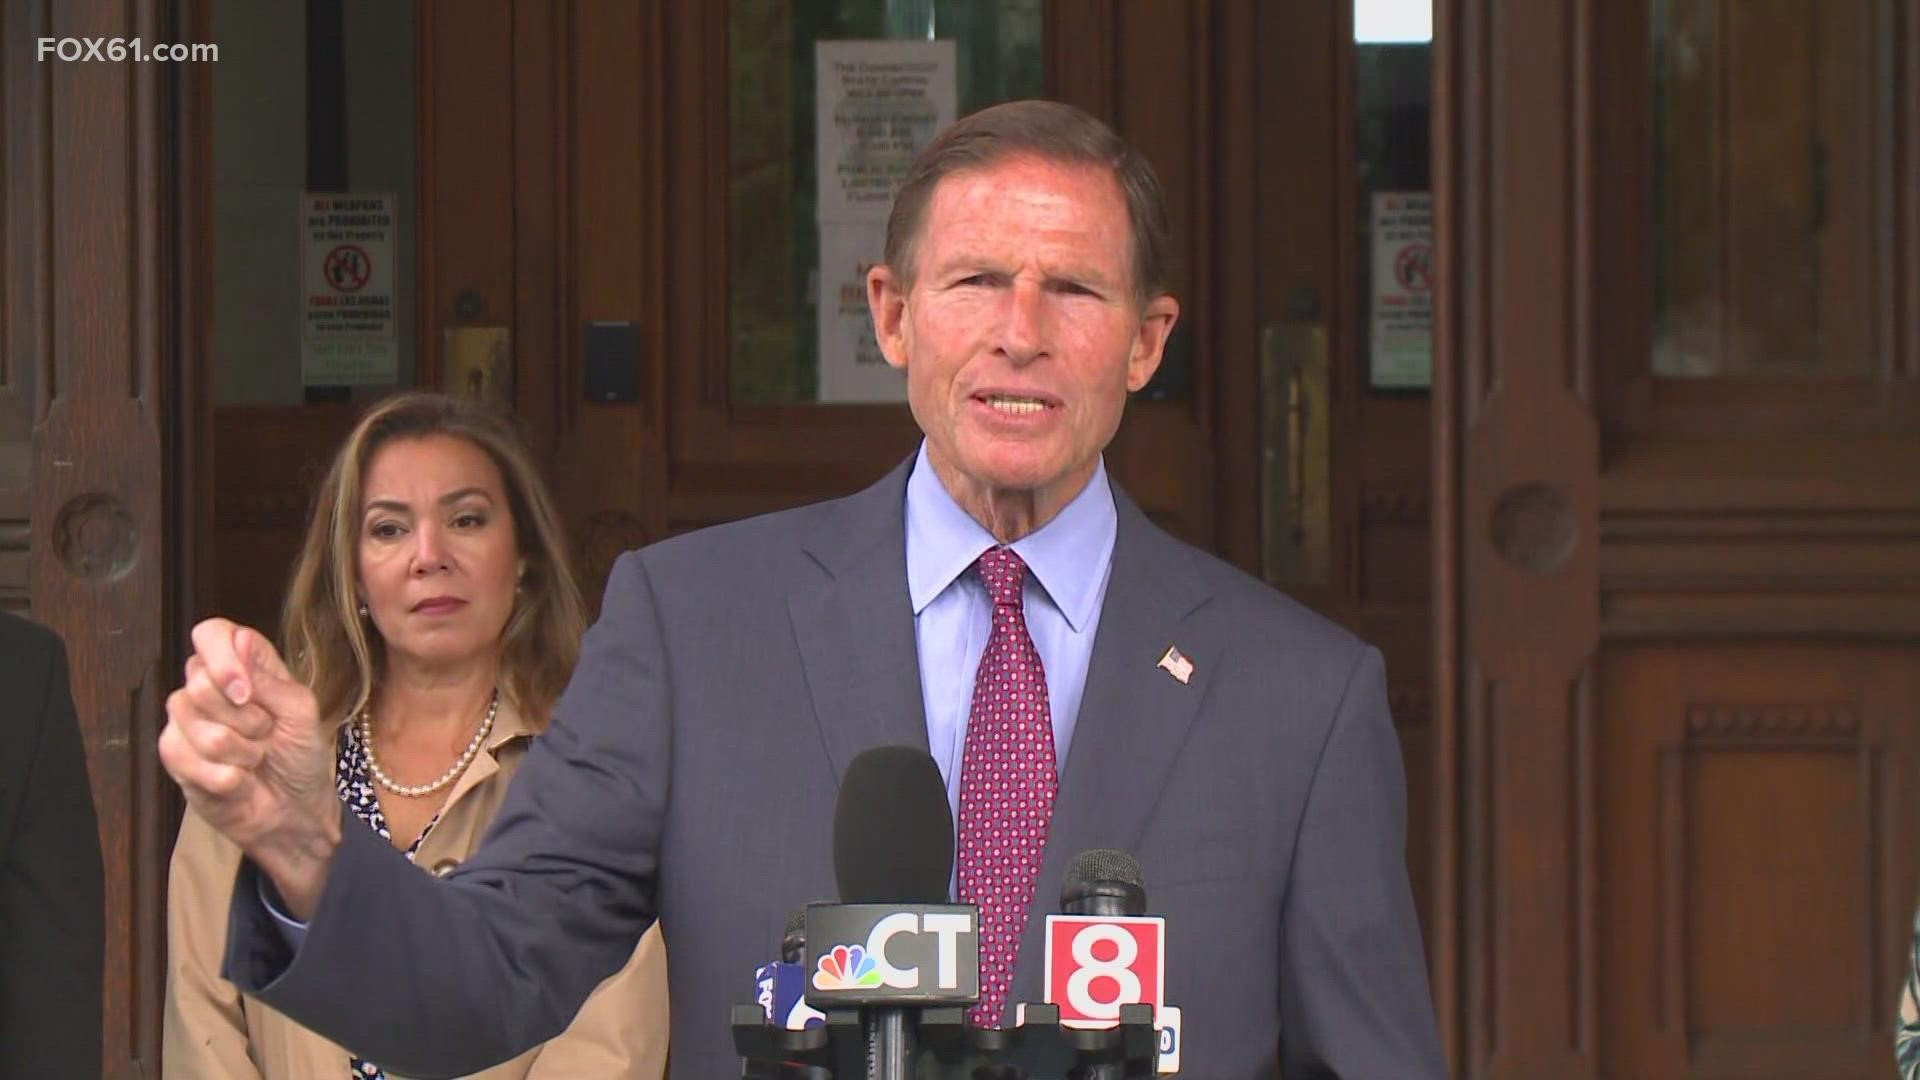 Blumenthal calls state legislation an avalanche with a partisan purpose